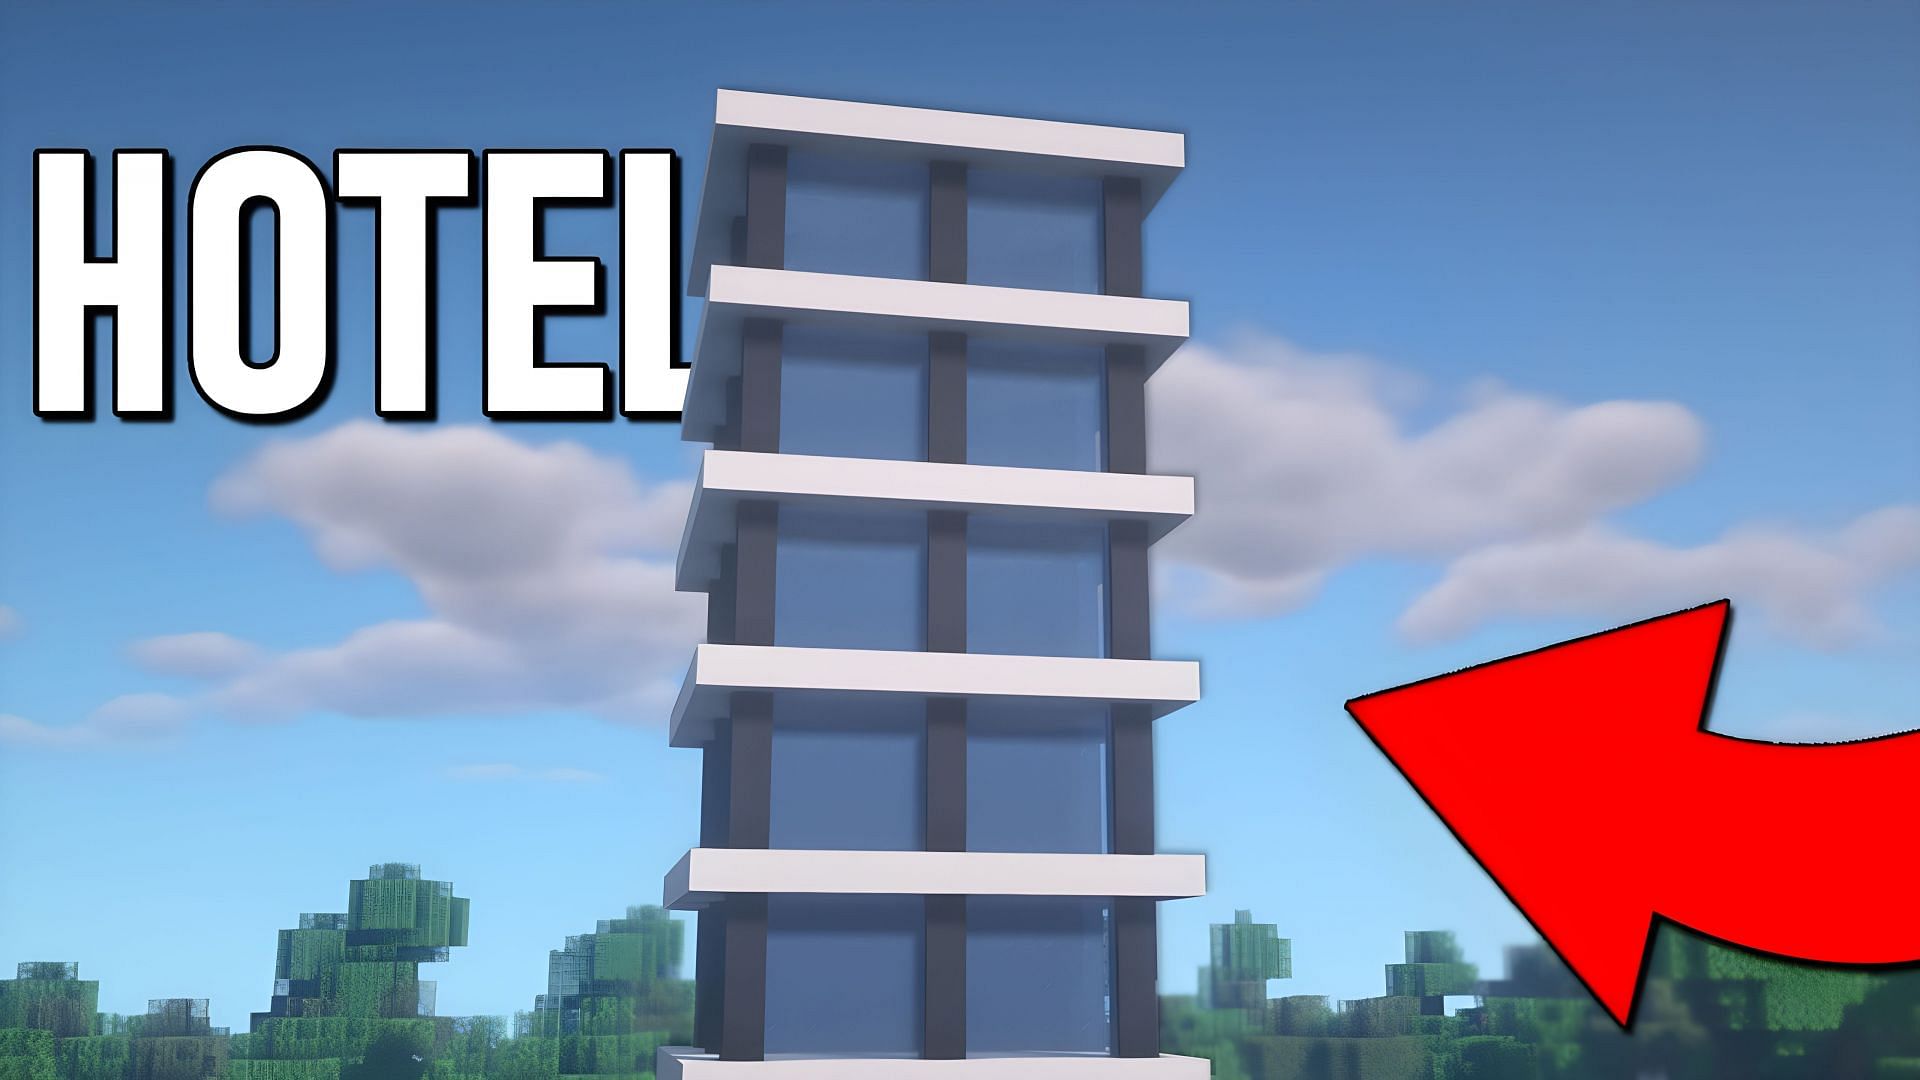 Hotels can be great builds in Minecraft (Image via Sportskeeda)